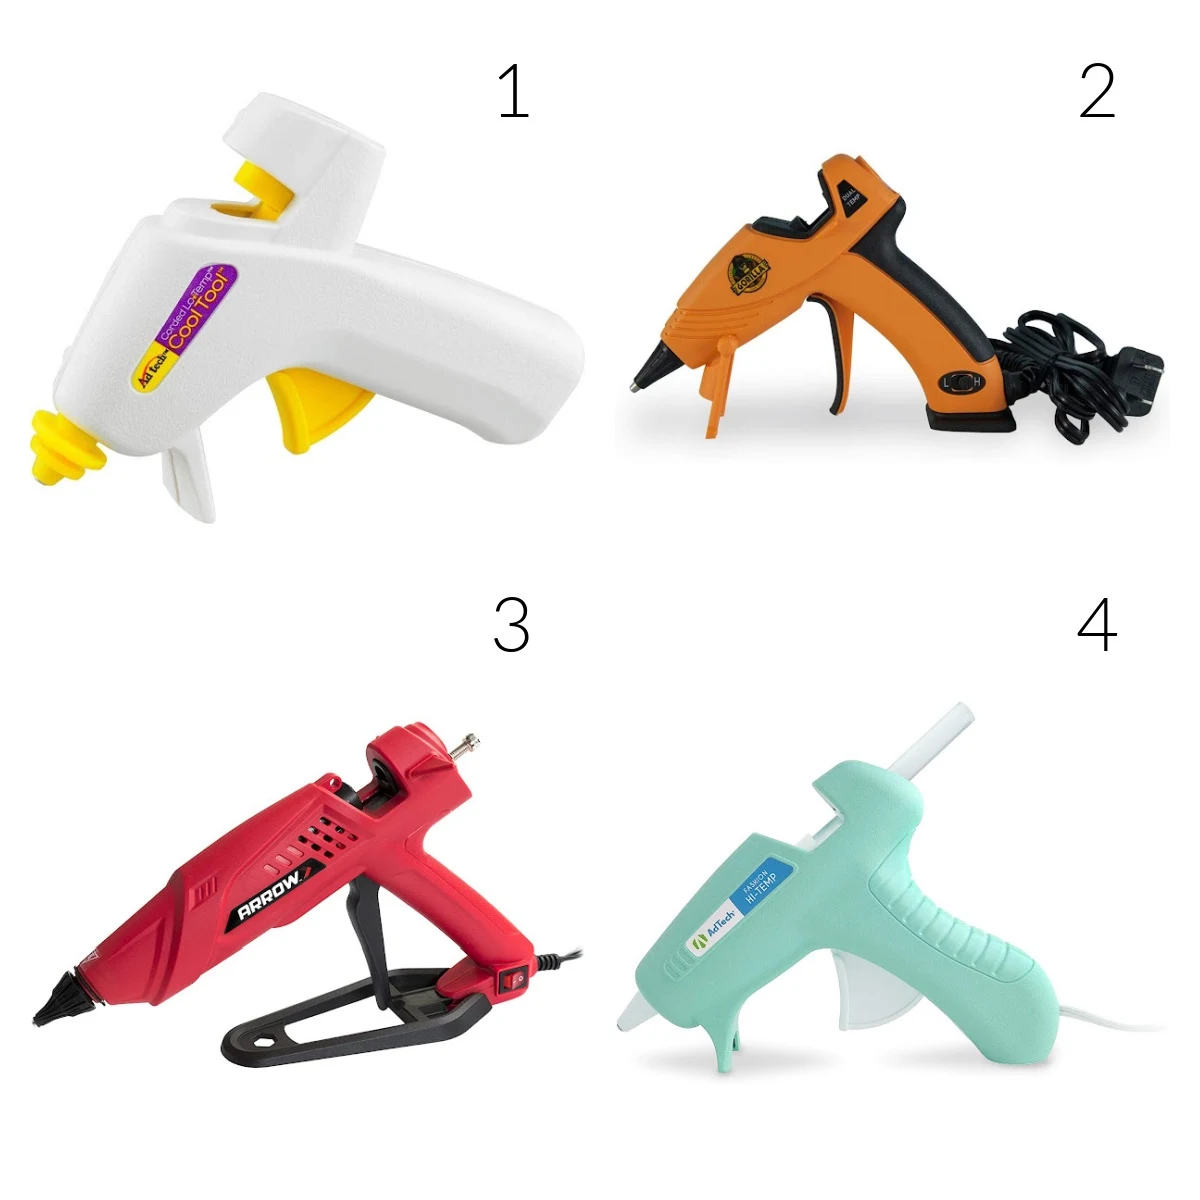 Glue gun options to choose from